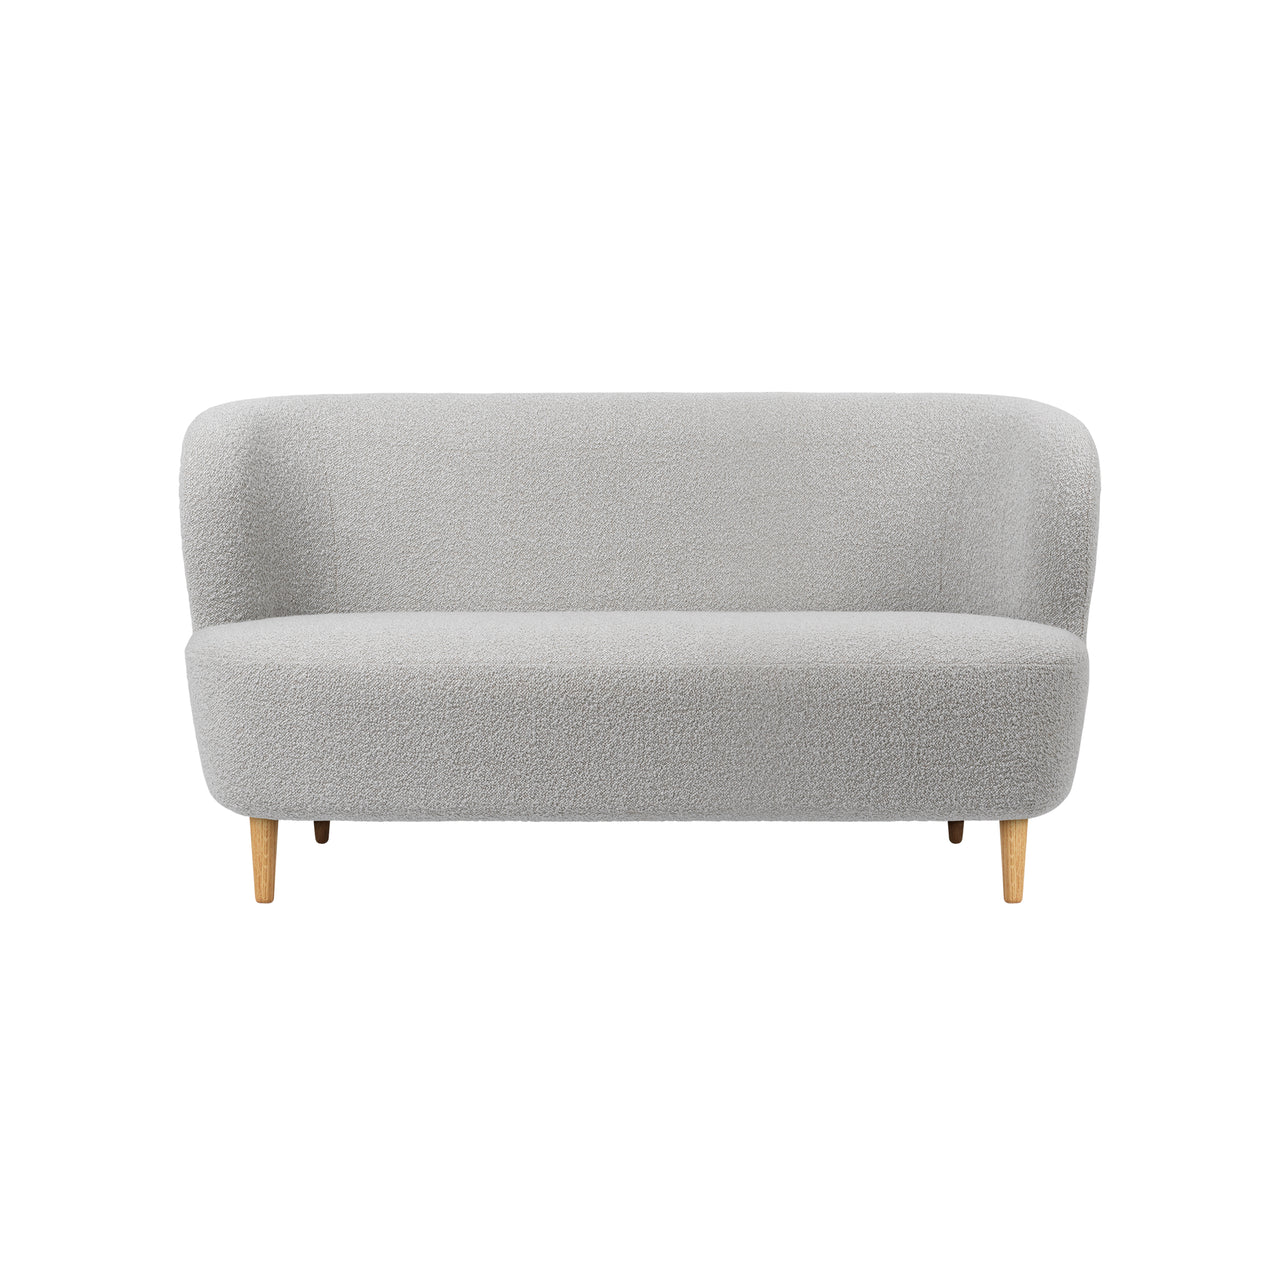 Stay Sofa: Wooden Legs + Small - 59.1